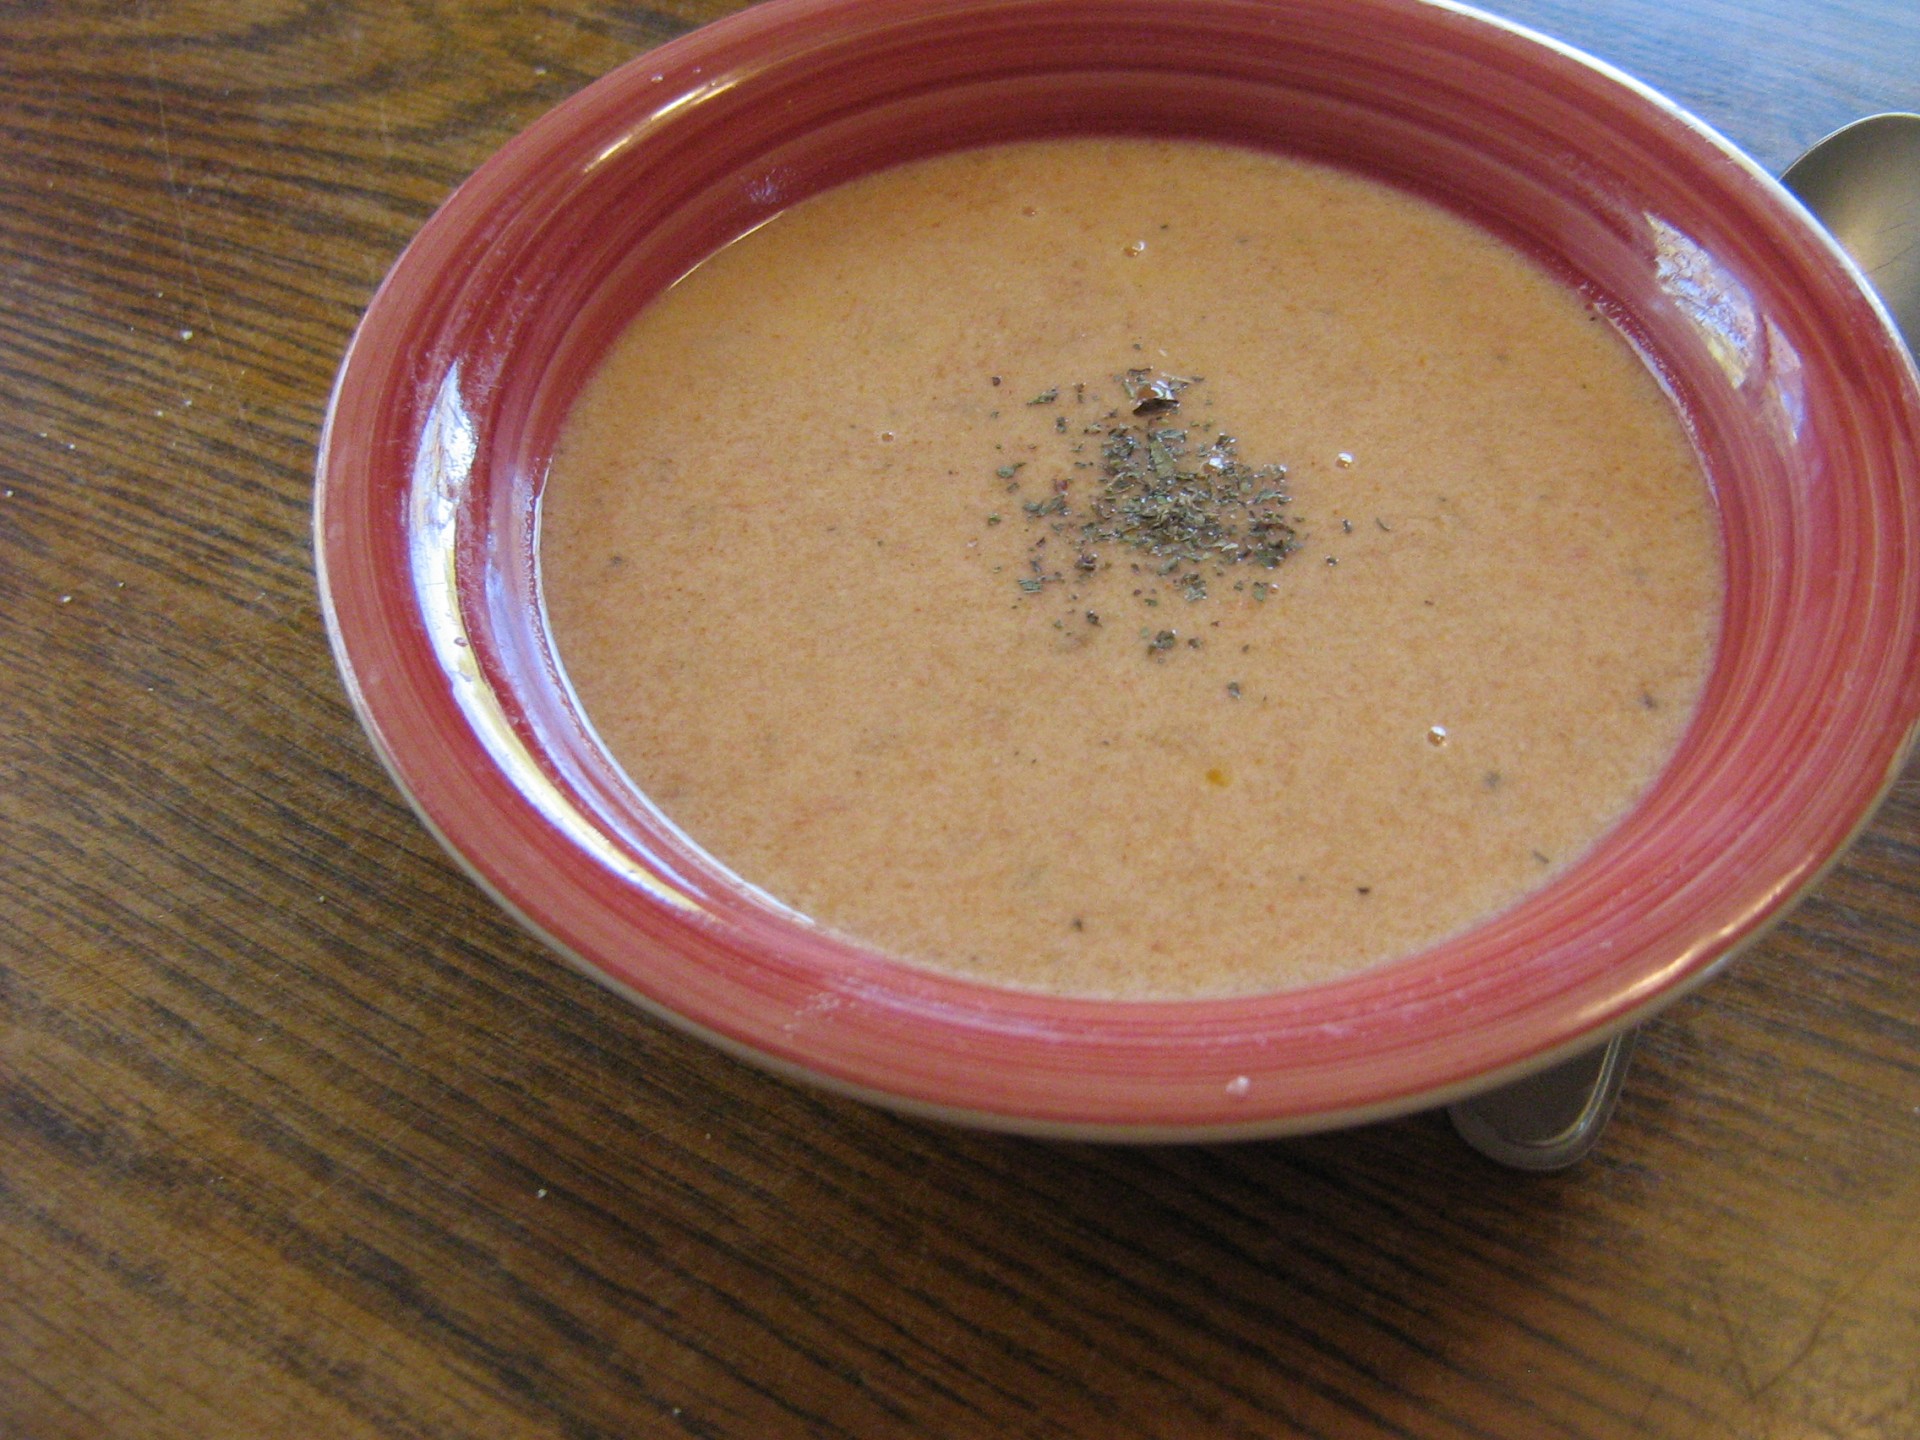 Cawl Tomato Ac Afal (Welsh Tomato and Apple Soup)